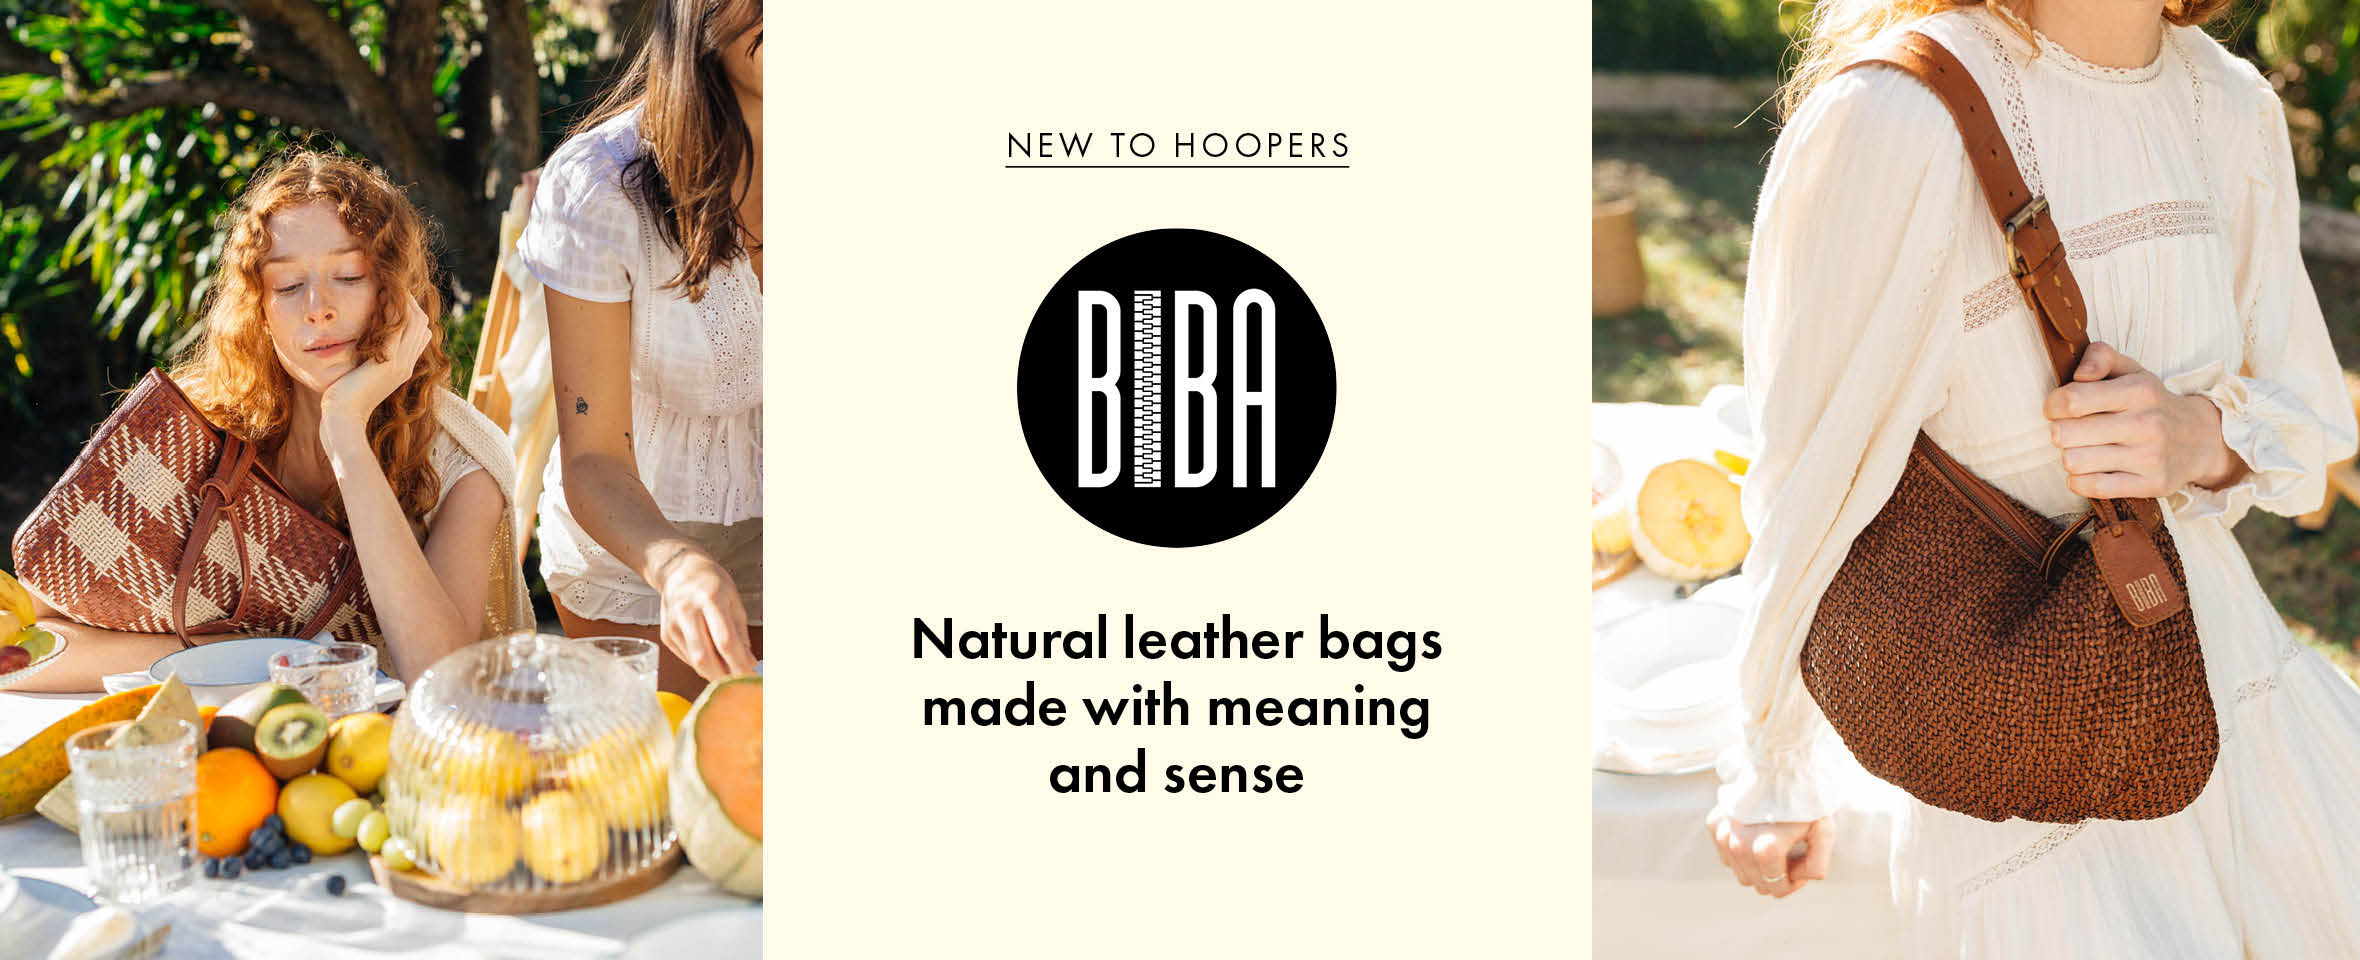 BIBA: Natural leather bags made with meaning and sense